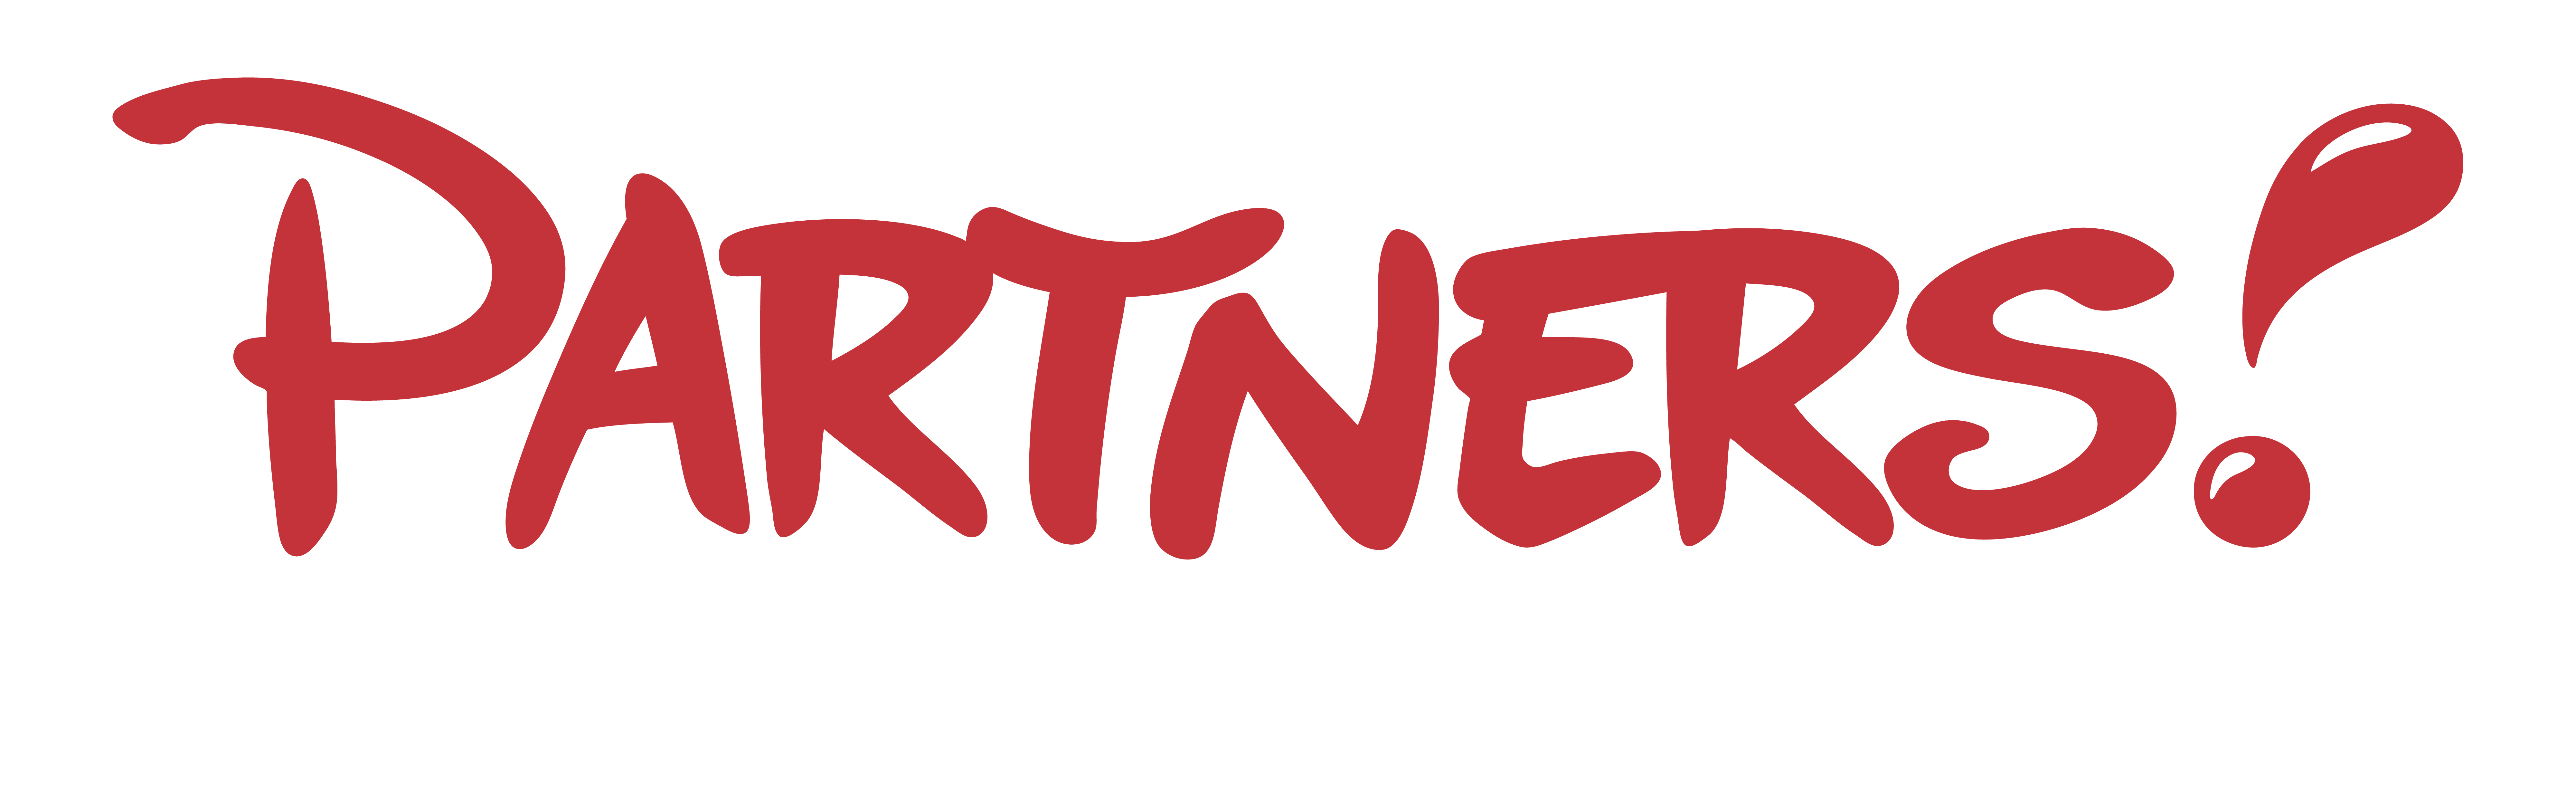 Partners Federal Credit Union